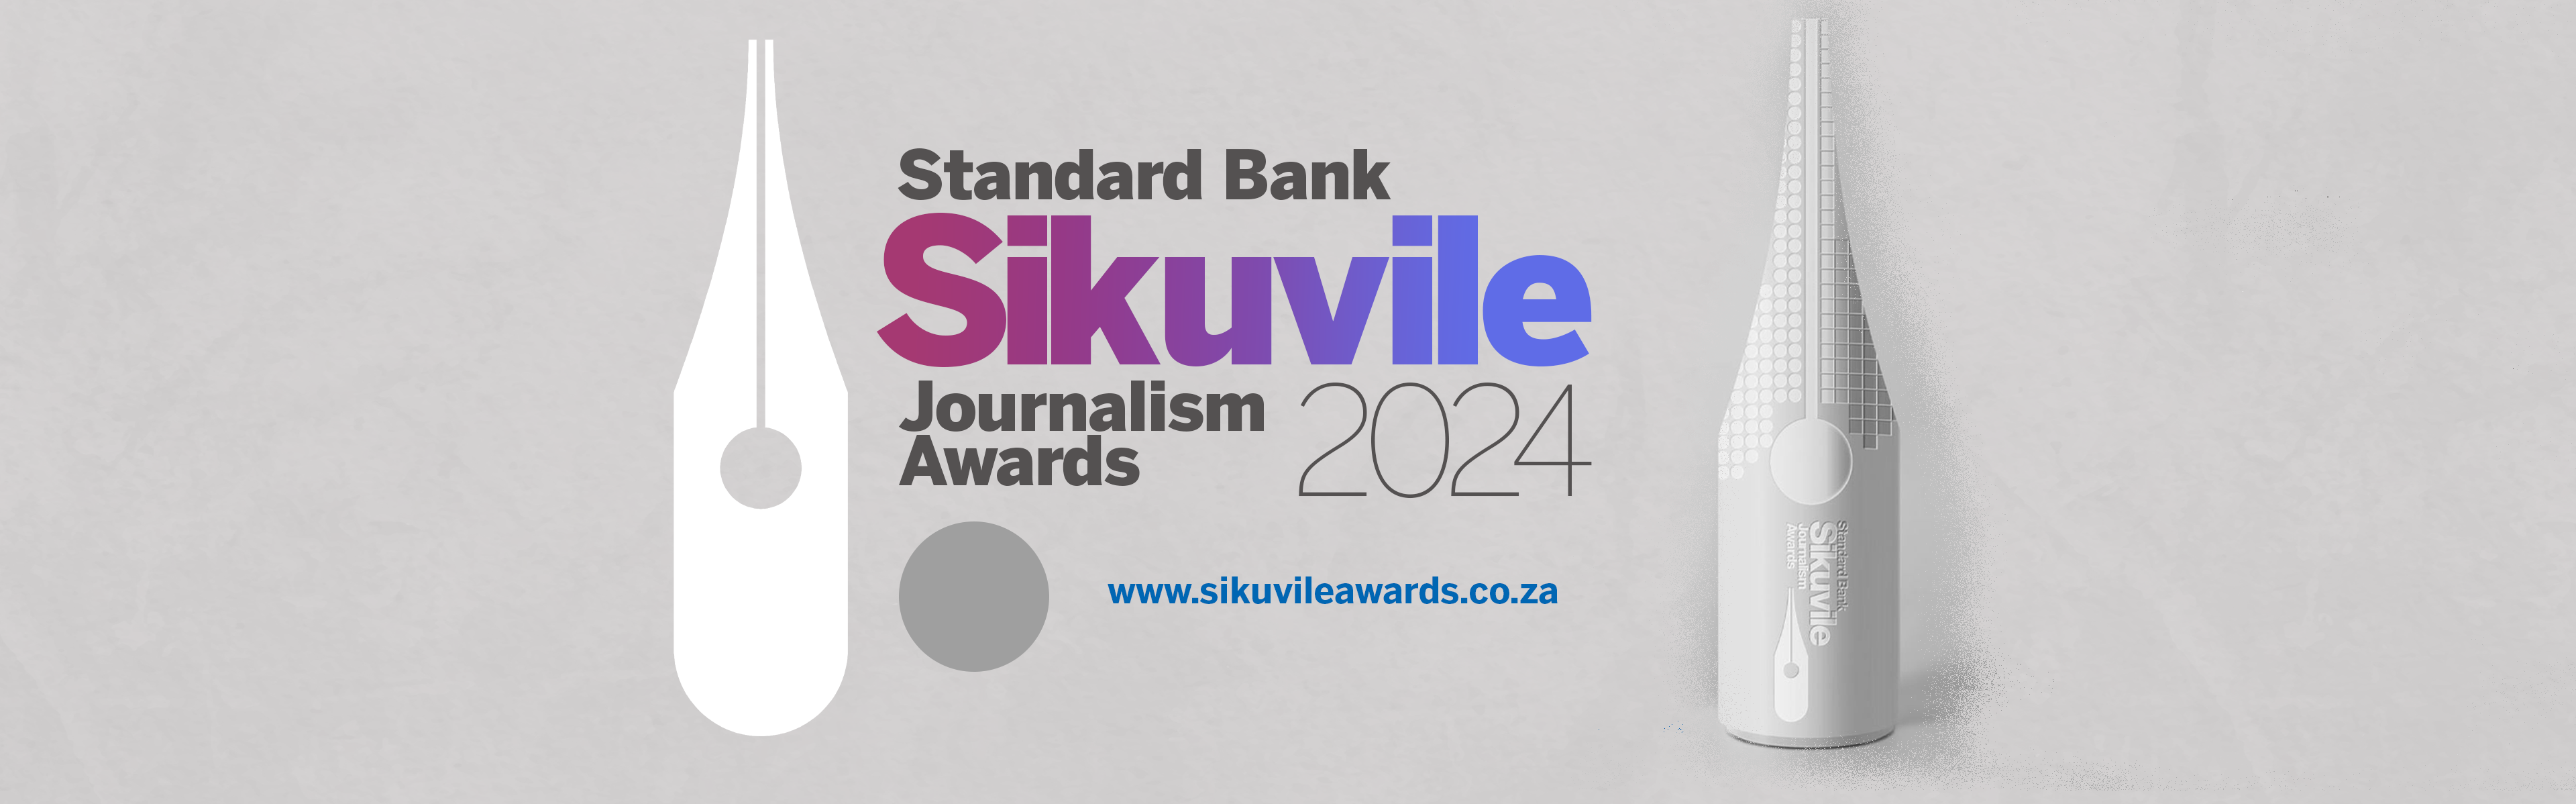 Sikuvile call for entries 5-